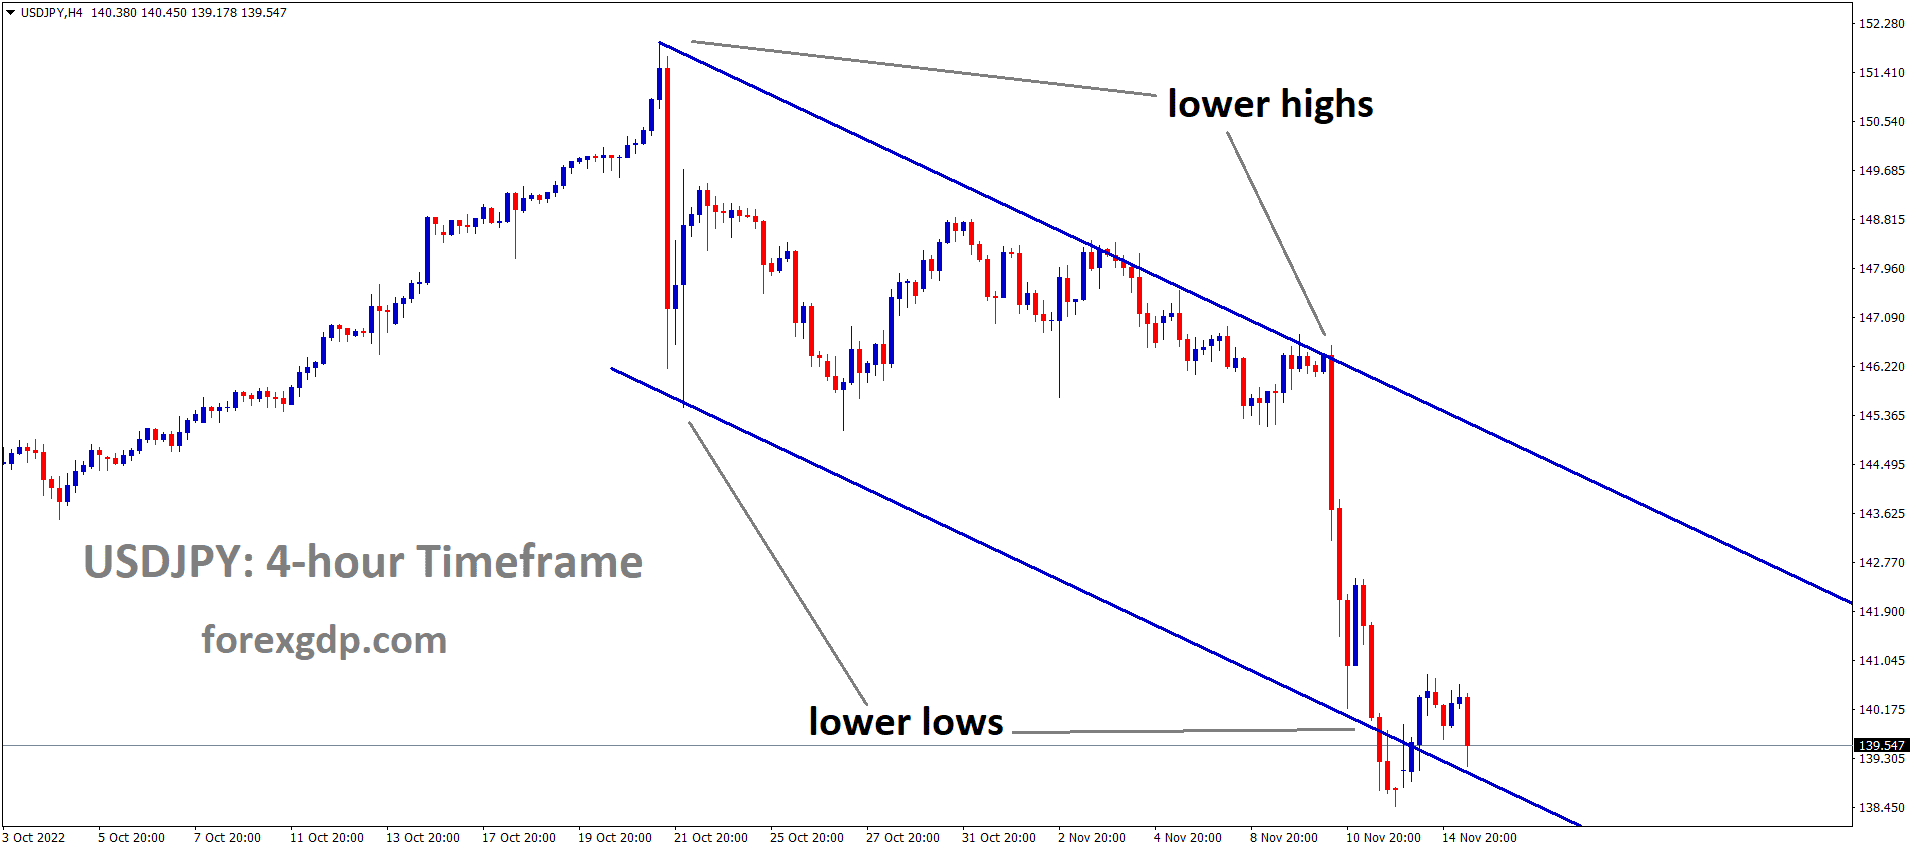 USDJPY is moving in the Descending channel and the market has reached the lower low area of the channel